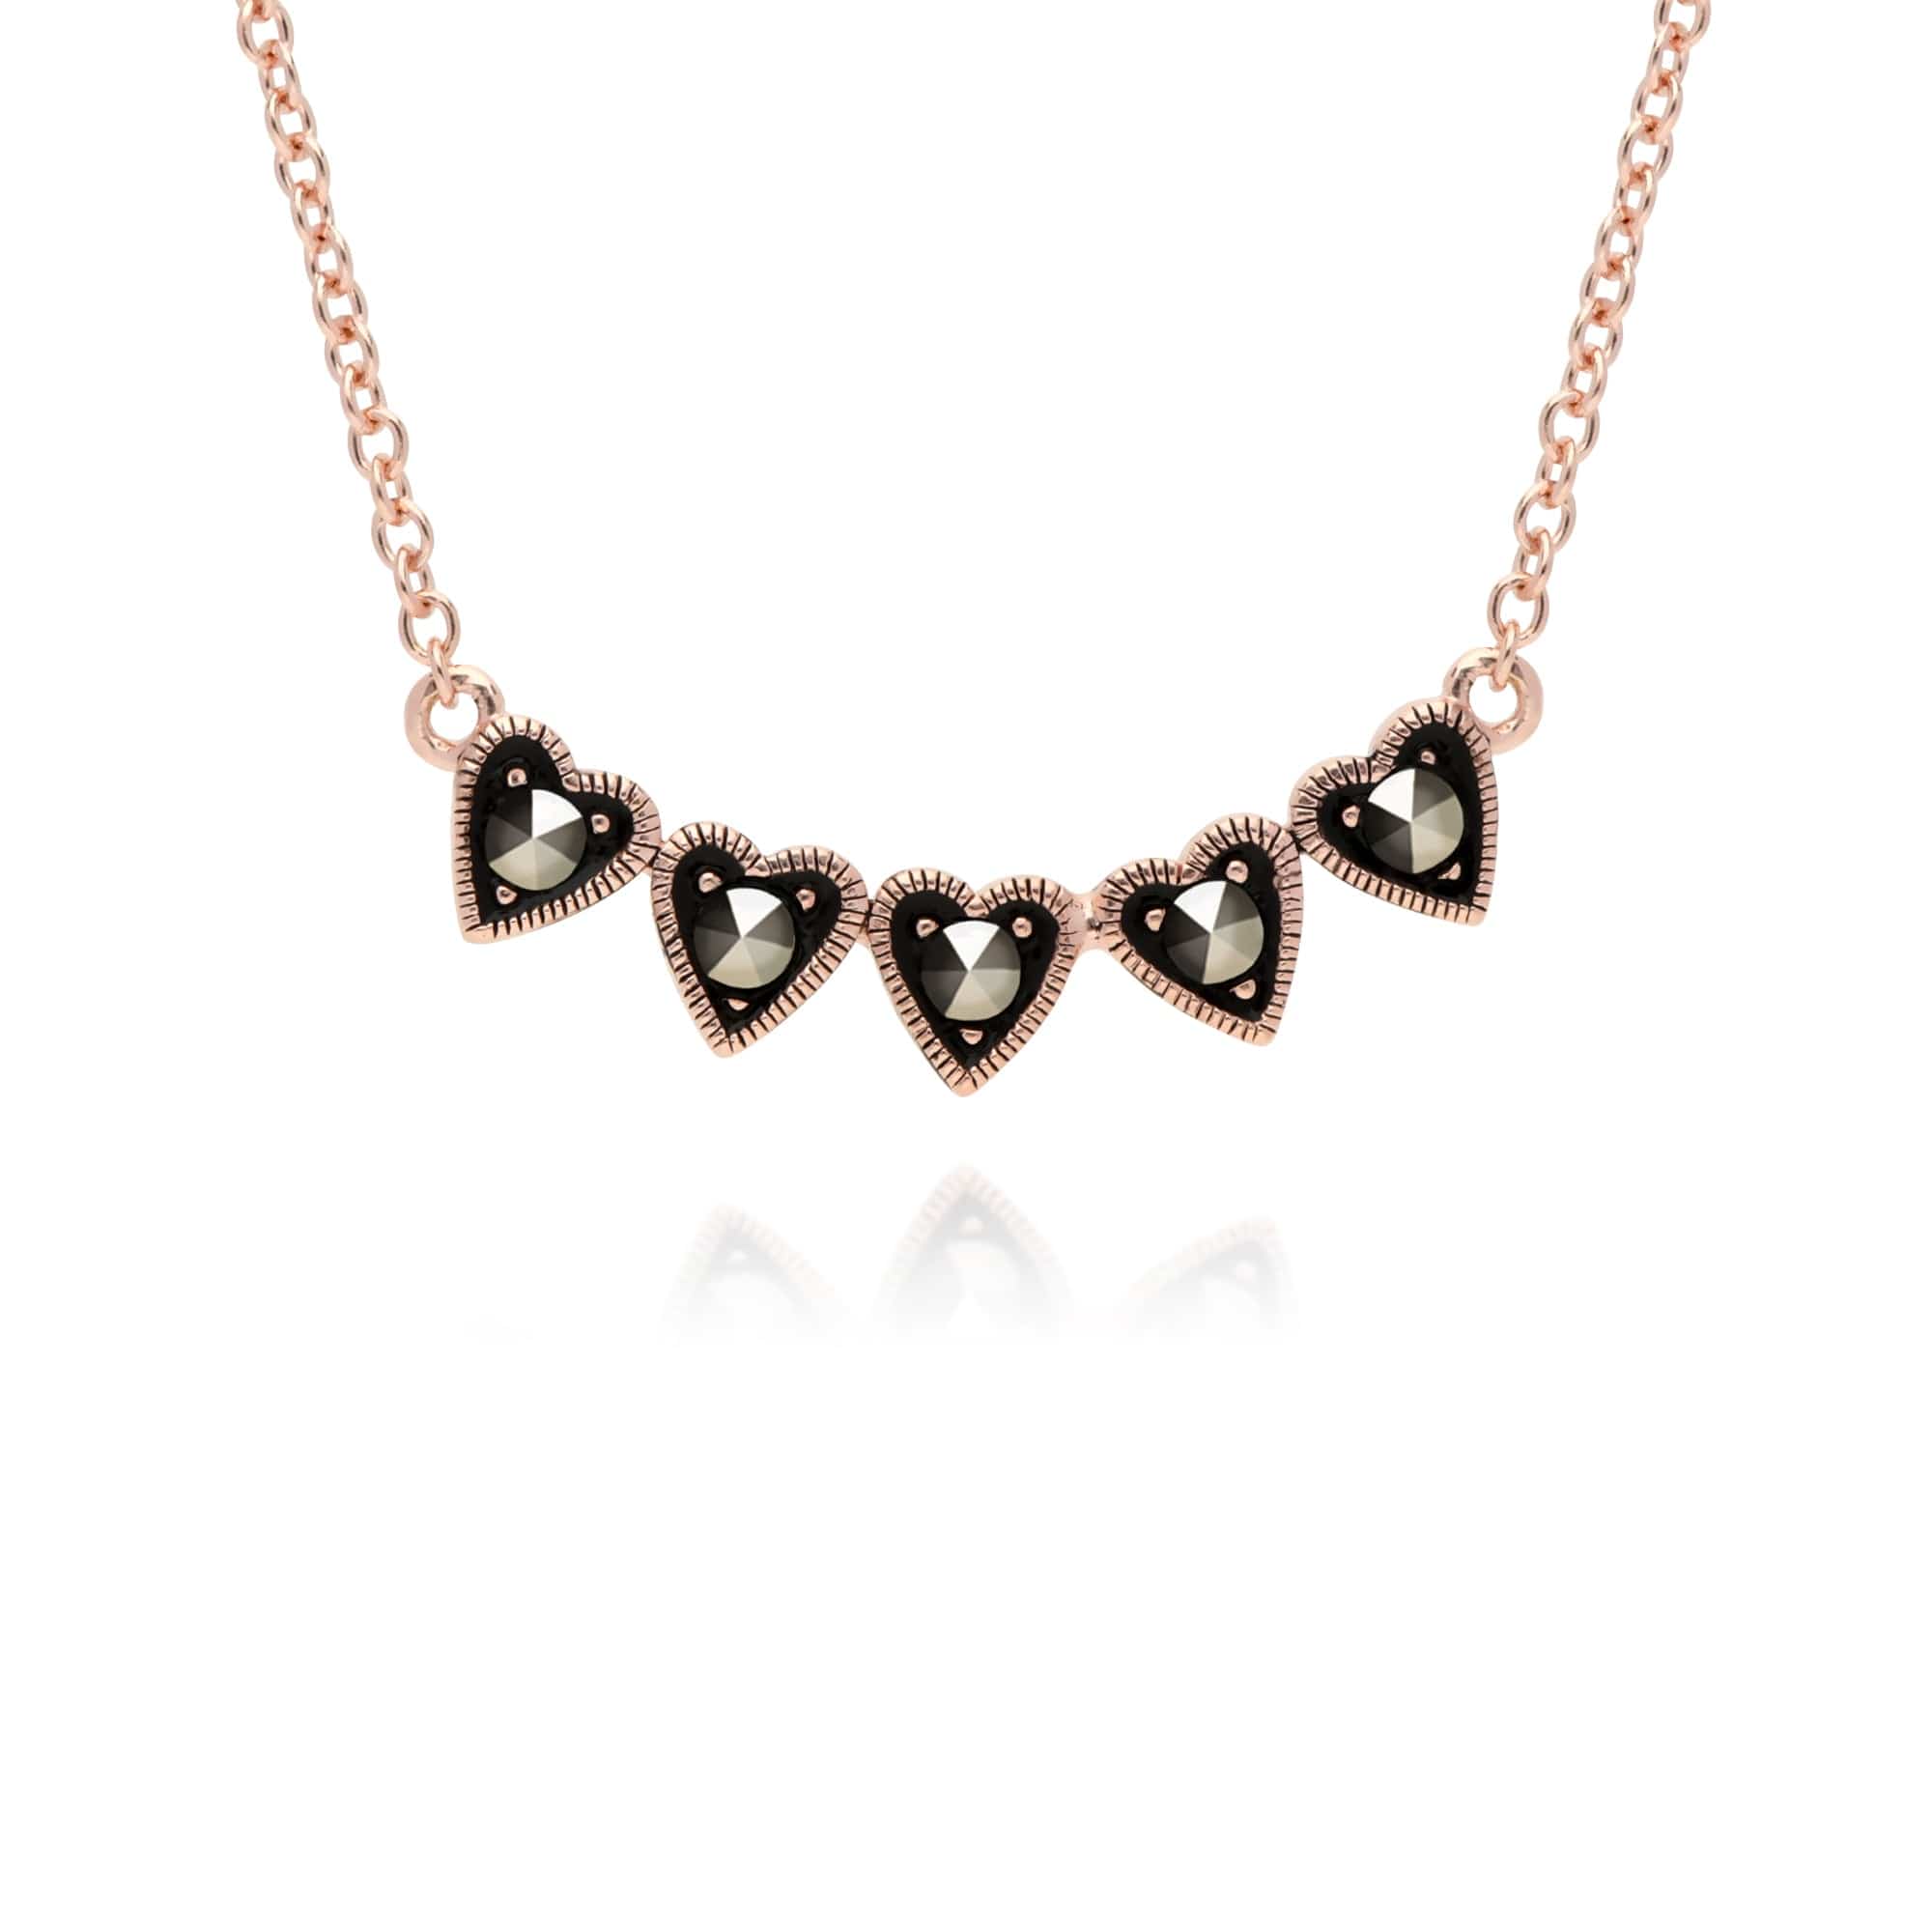 224E025301925-224N017601925 Rose Gold Plated Marcasite Heart Stud Earrings & Necklace Set in 925 Sterling Silver 3